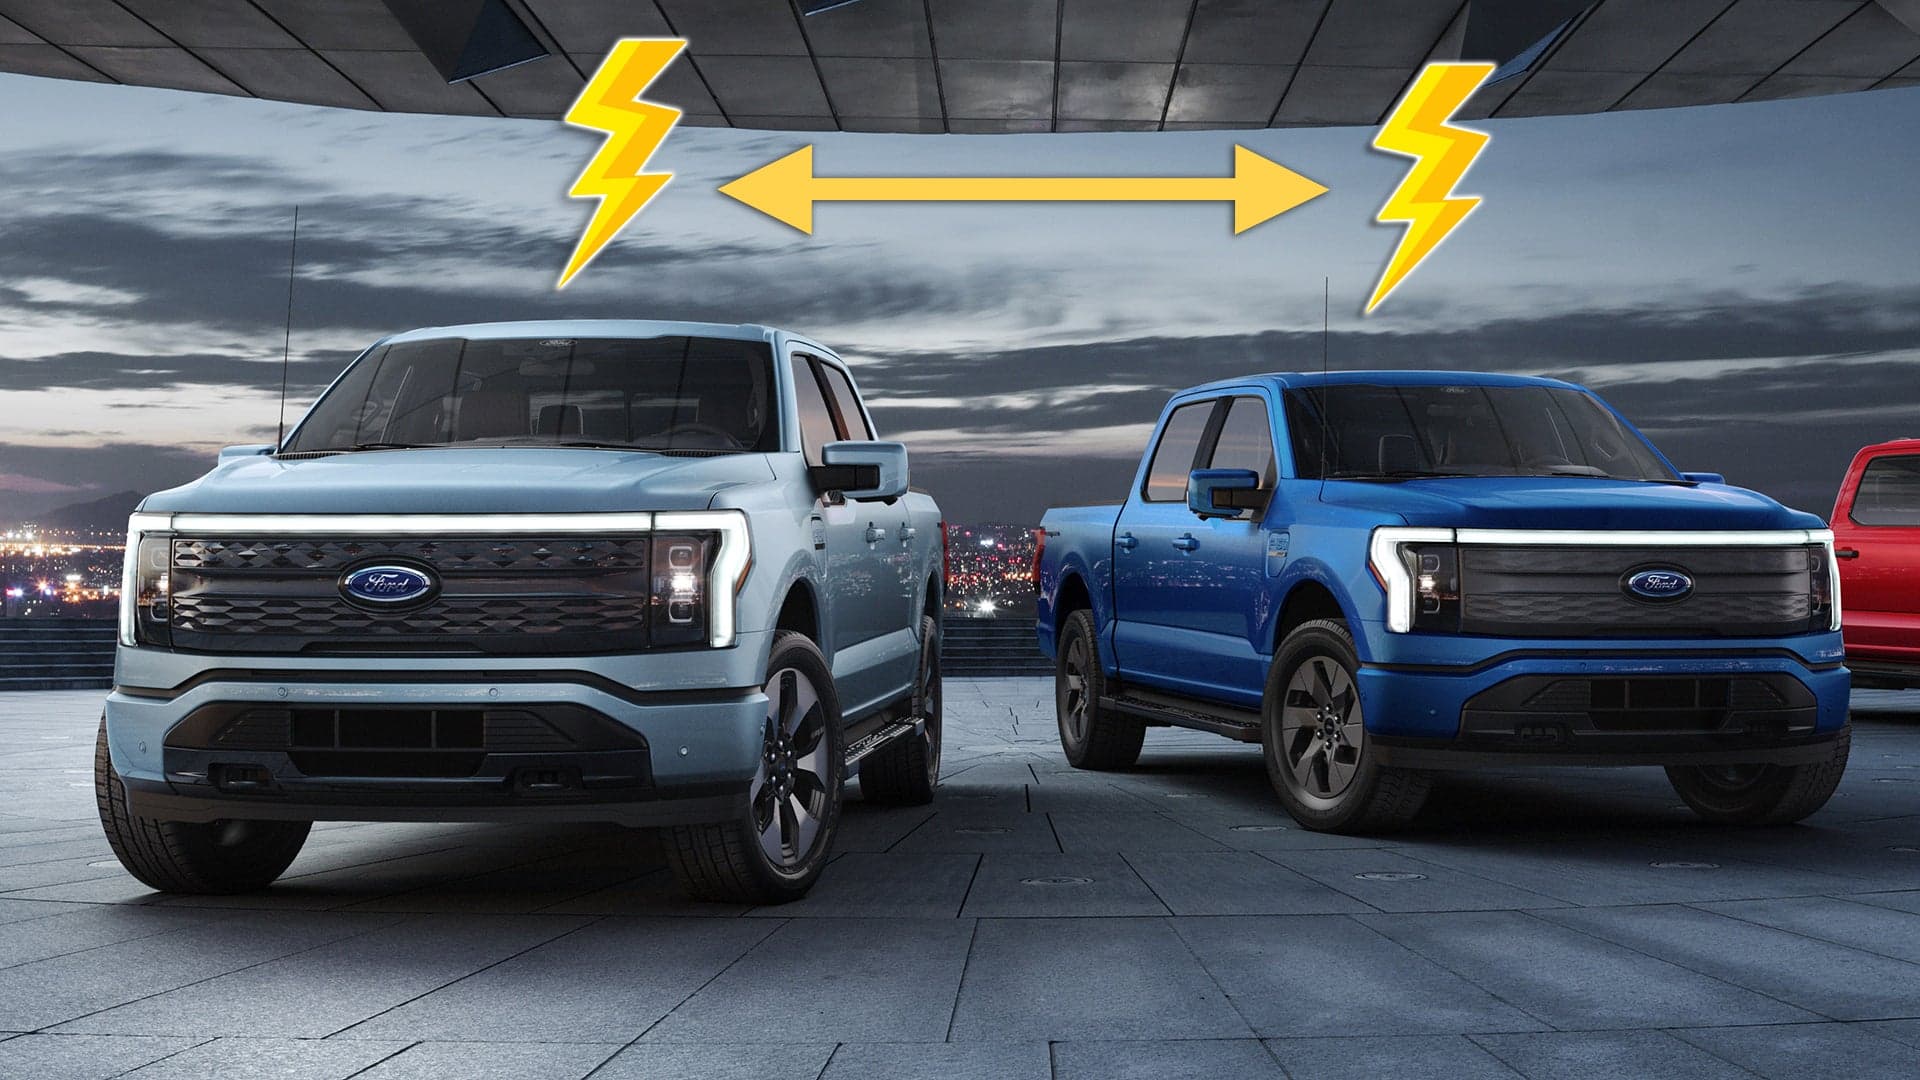 The Ford F-150 Lightning Will Be Able to Charge Other Lightnings